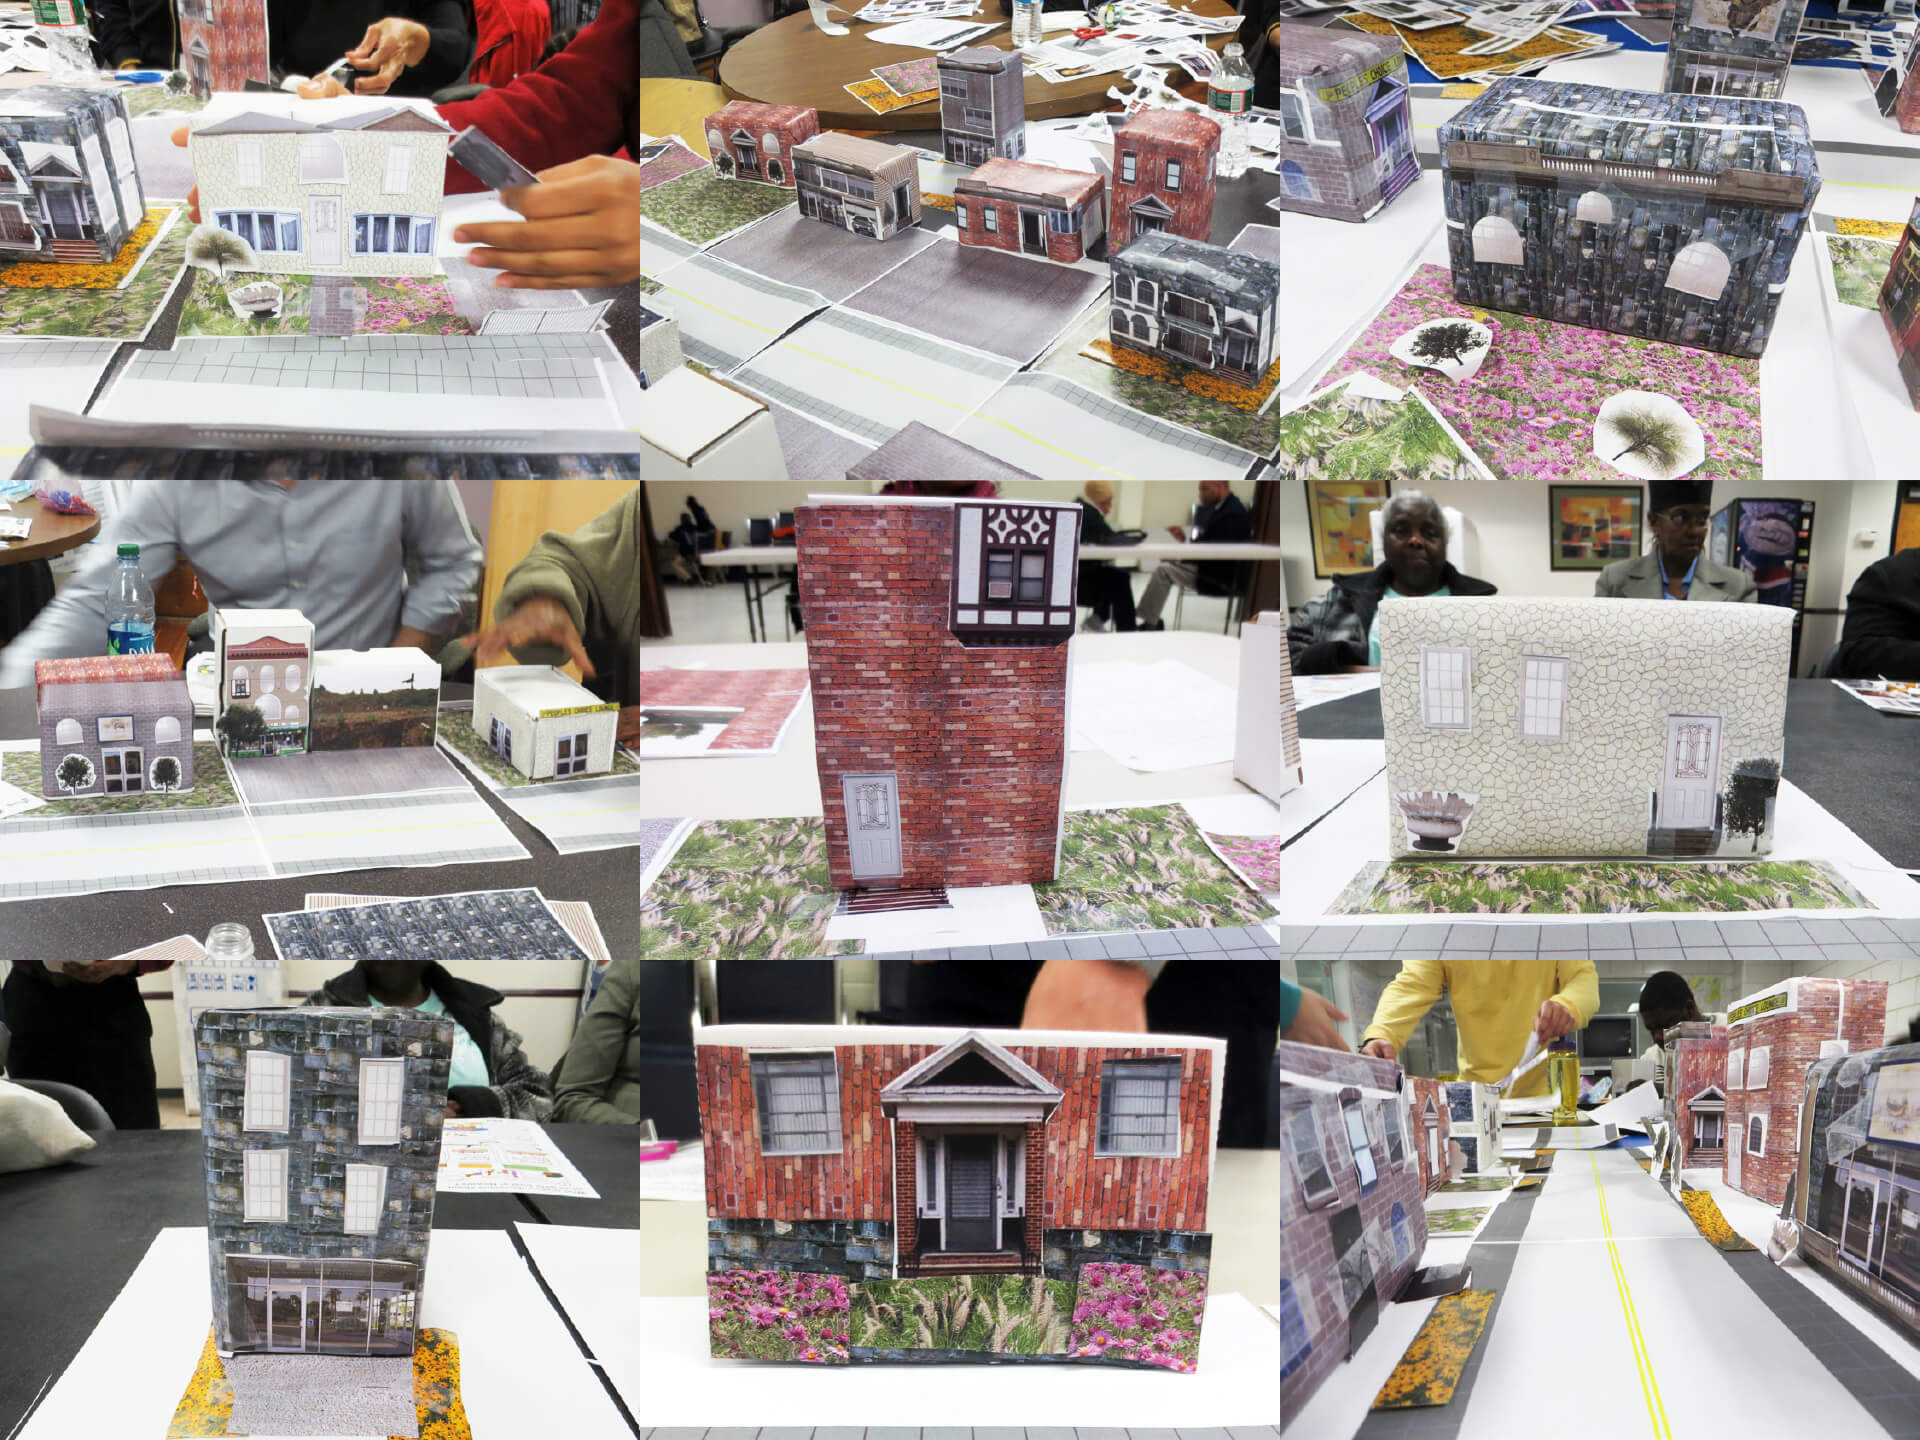 Hector’s work on the Newark Zoning & Land Use Regulations (known affectionately as NZLUR, pronounced “NUZZ-LER”) included new regulations, popular education workshops, and the first scale model of the entire city